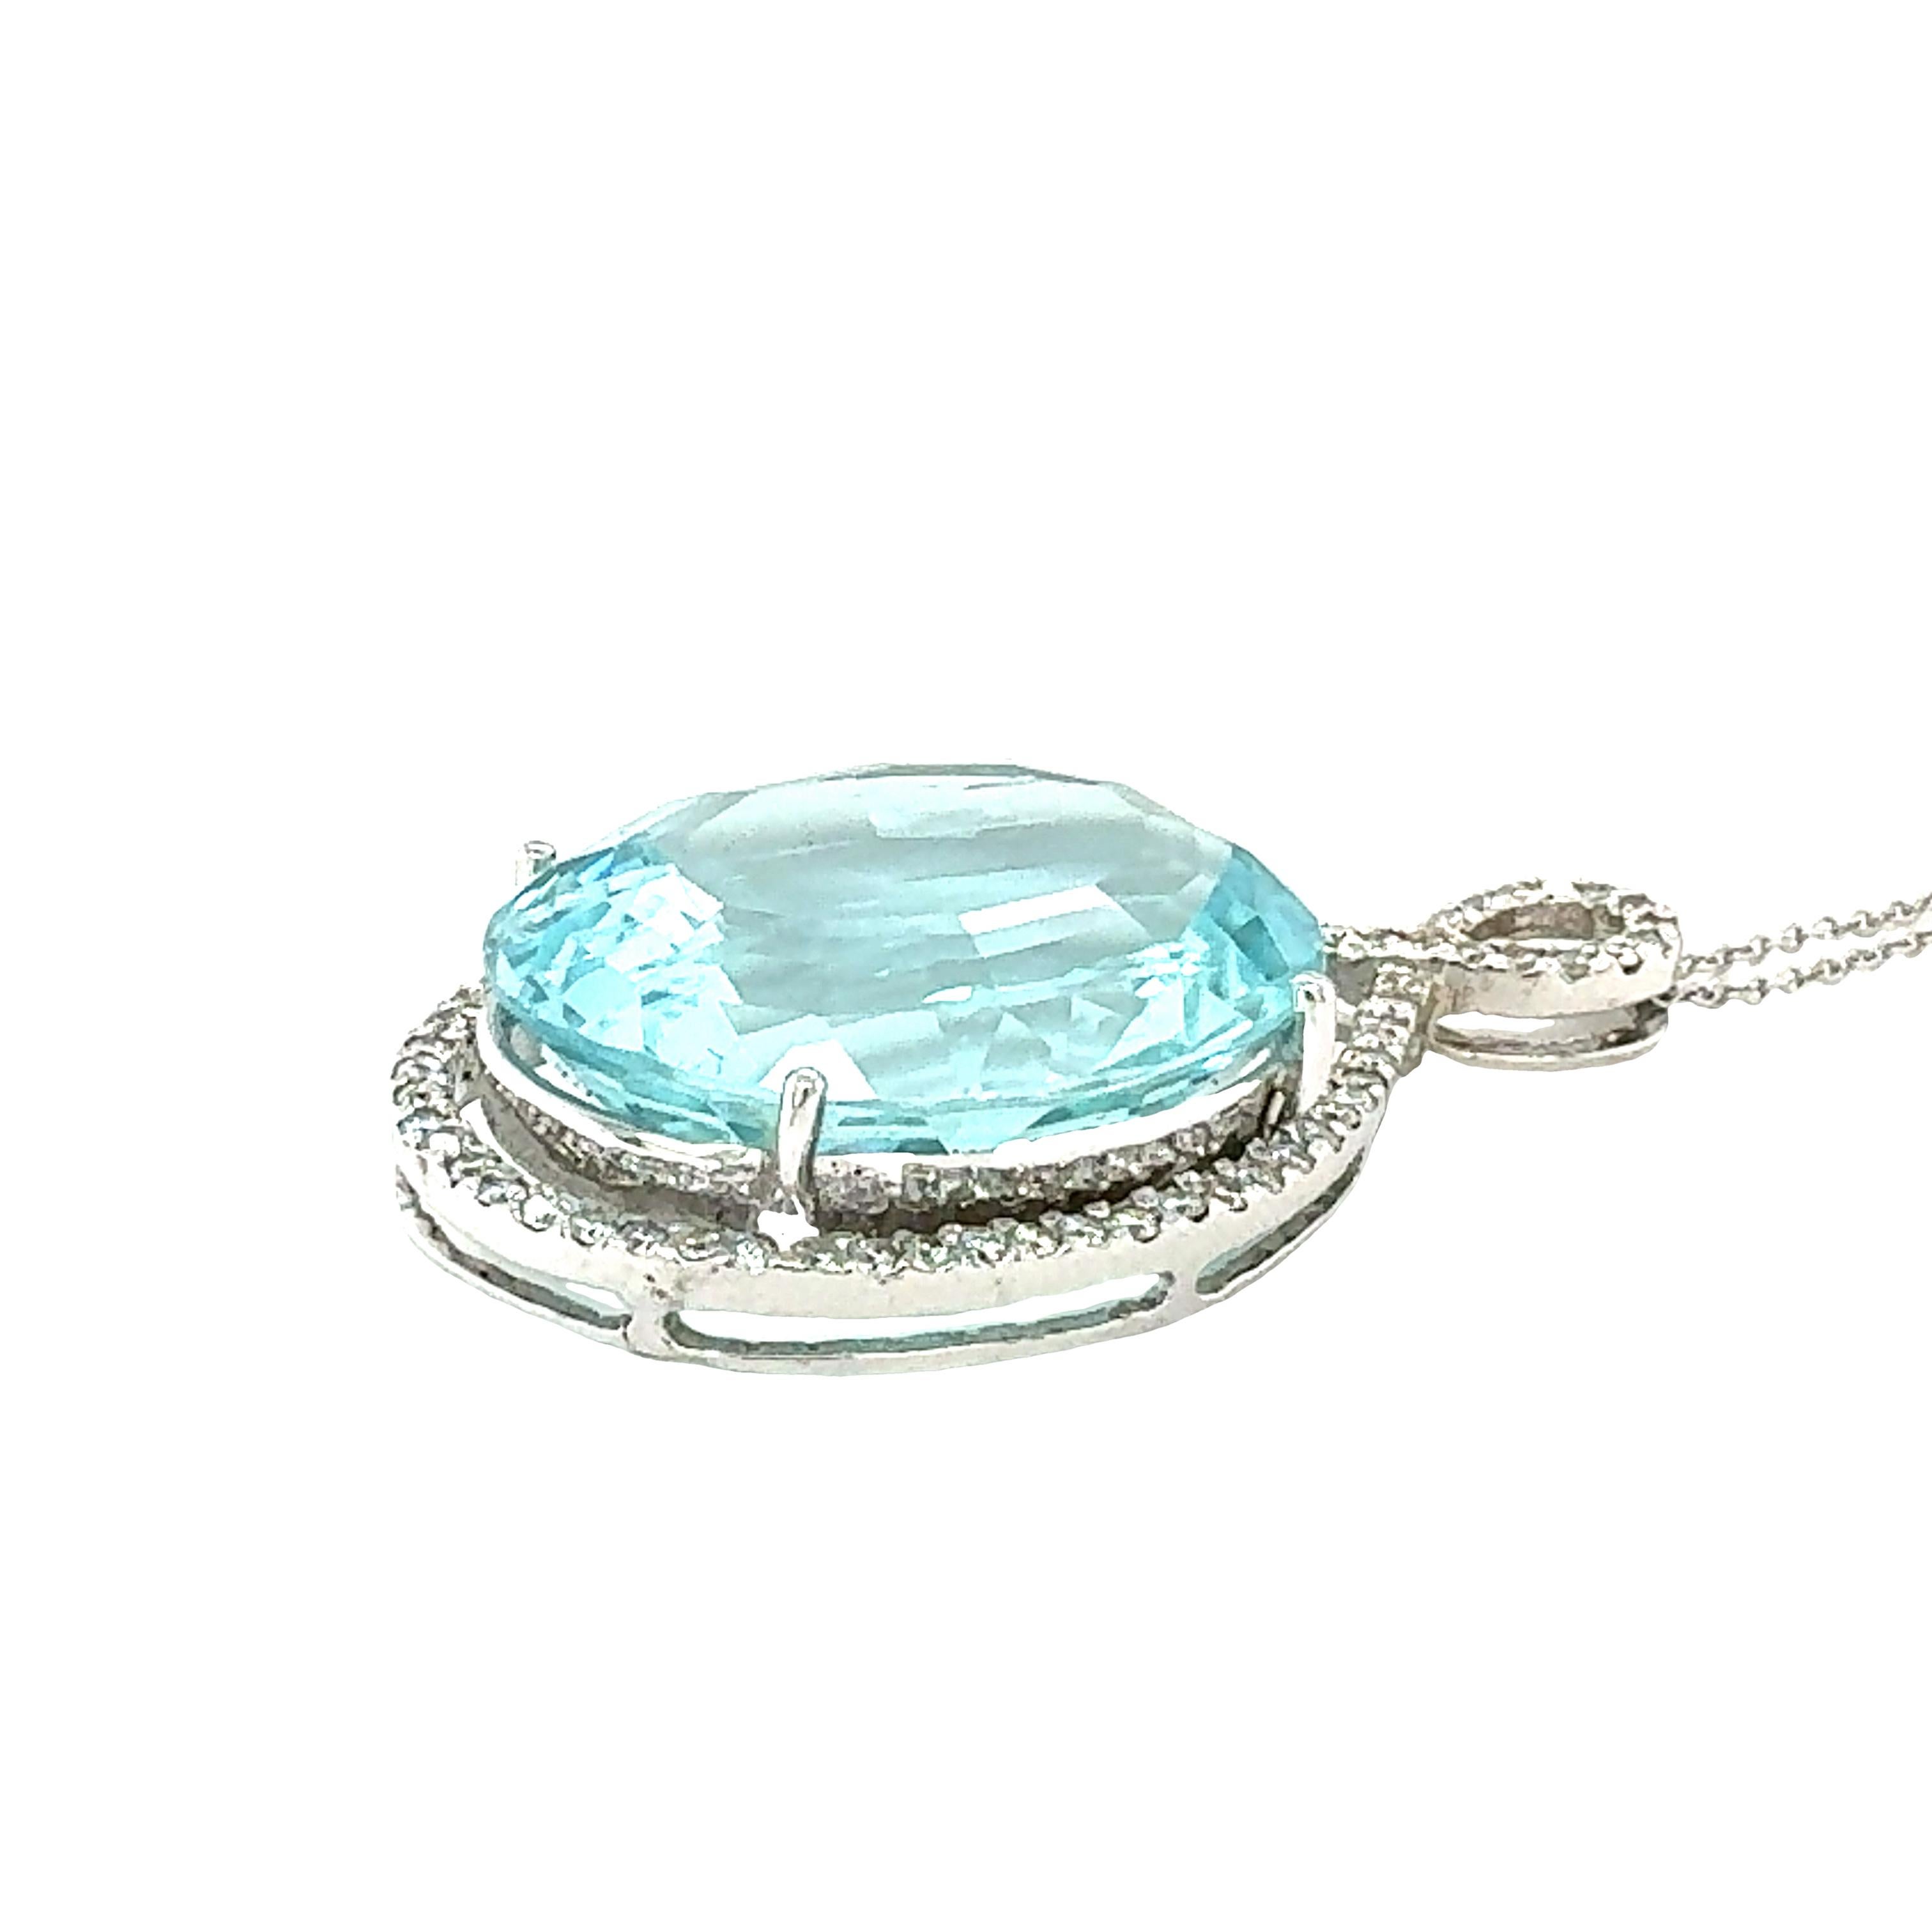 One aquamarine and diamond pendant in 14K white gold centering one prong set, oval brilliant cut aqua weighing approximately 48 ct.  Enhanced by 64 pave set, round brilliant cut diamonds weighing approximately 0.34 ct. with H-I color and SI-1